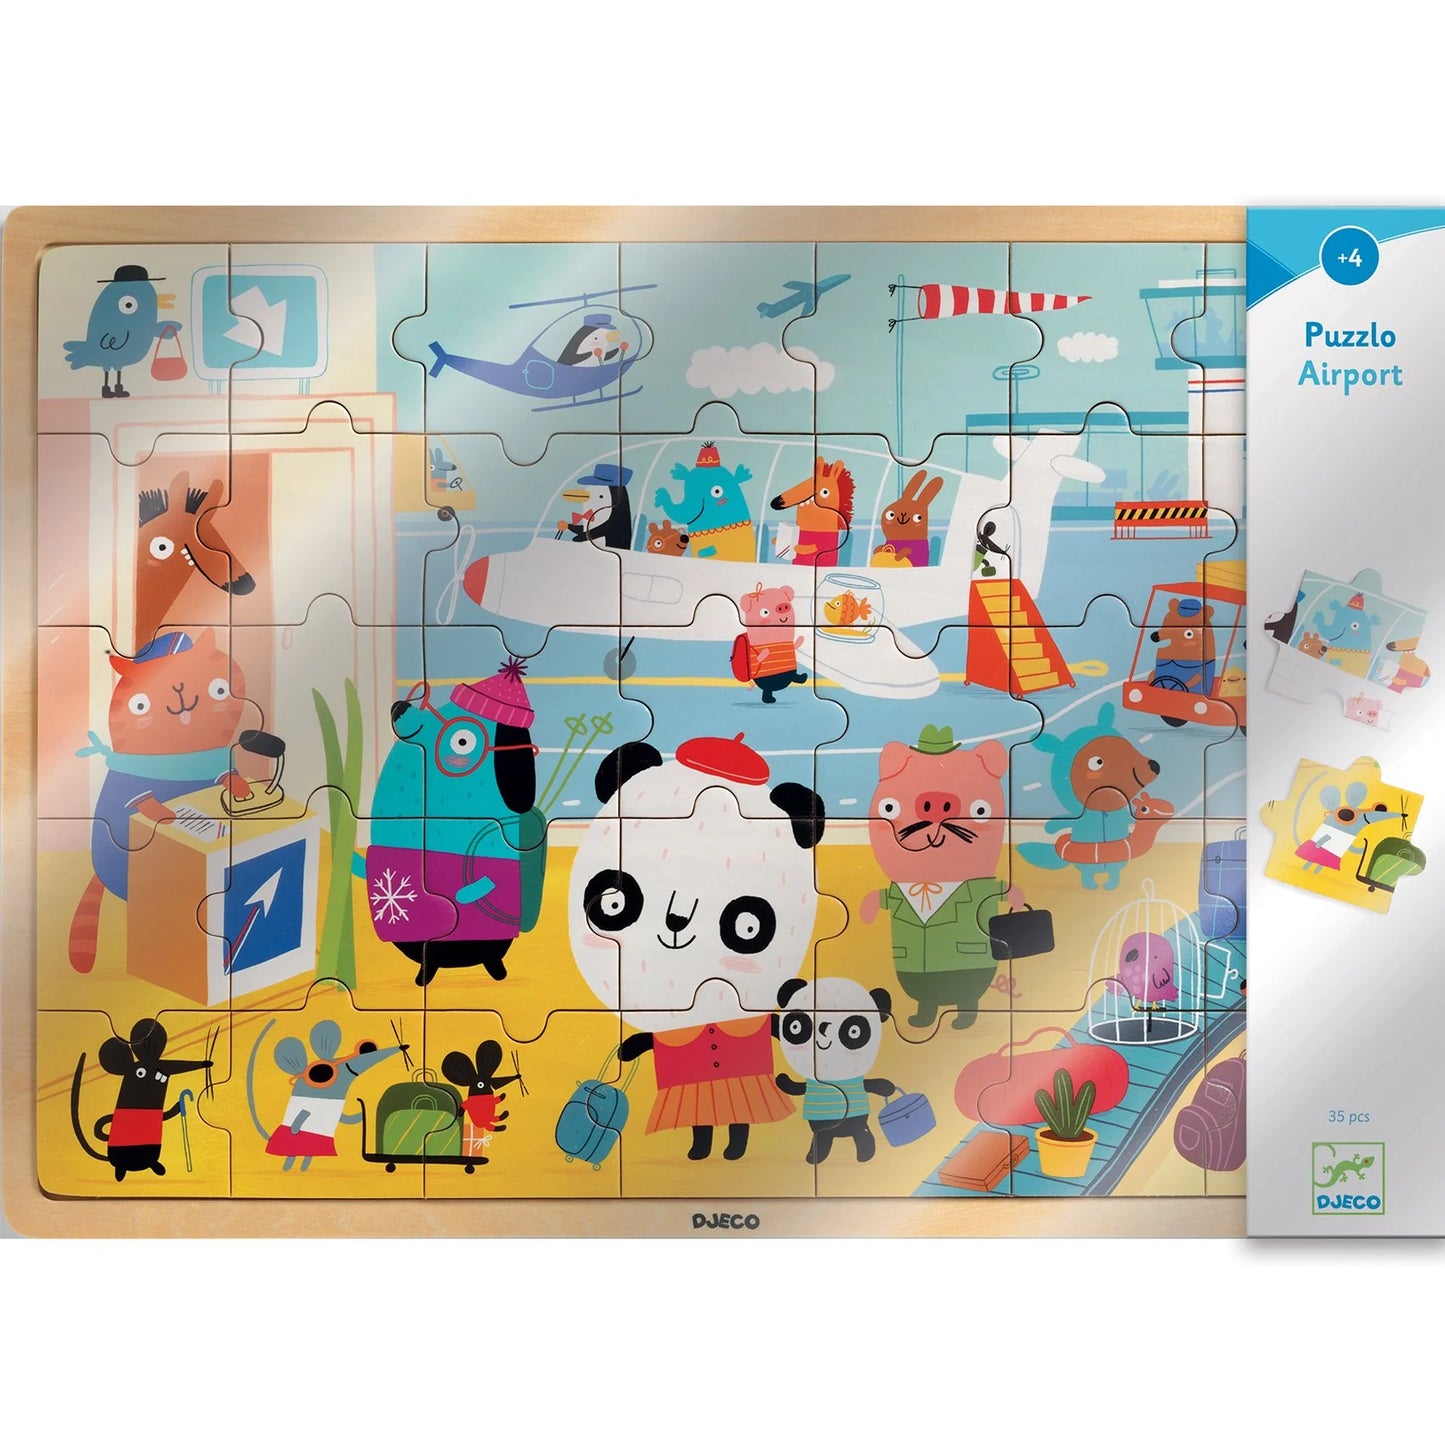 Puzzlo Airport 35pc Wooden Jigsaw Puzzle